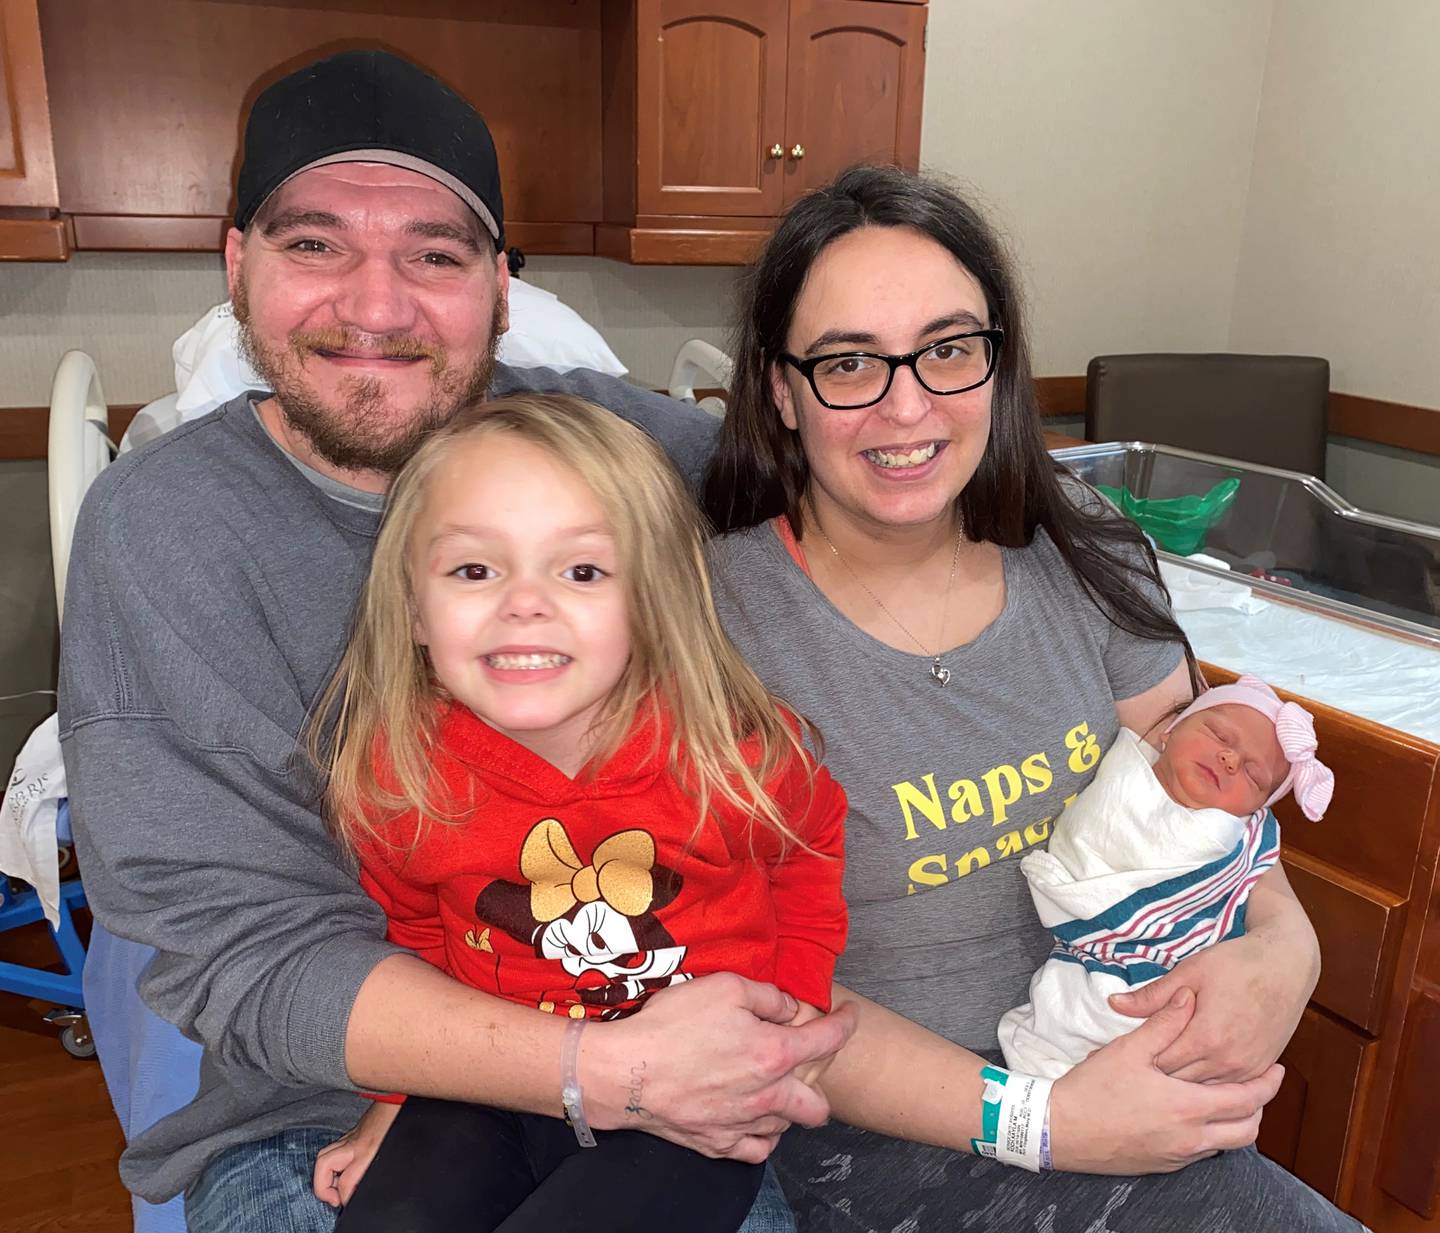 Kayla Koch and Jeremy Wade of Marseilles welcomed Paige Lee Ann Wade at 6:23 a.m. Jan. 2 at Morris Hospital. Paige weighed 6 pounds, 5 oz., and measured 19 inches in length.
Paige has a big sister, Aliana, 3, and a big brother, Brendon, 15.